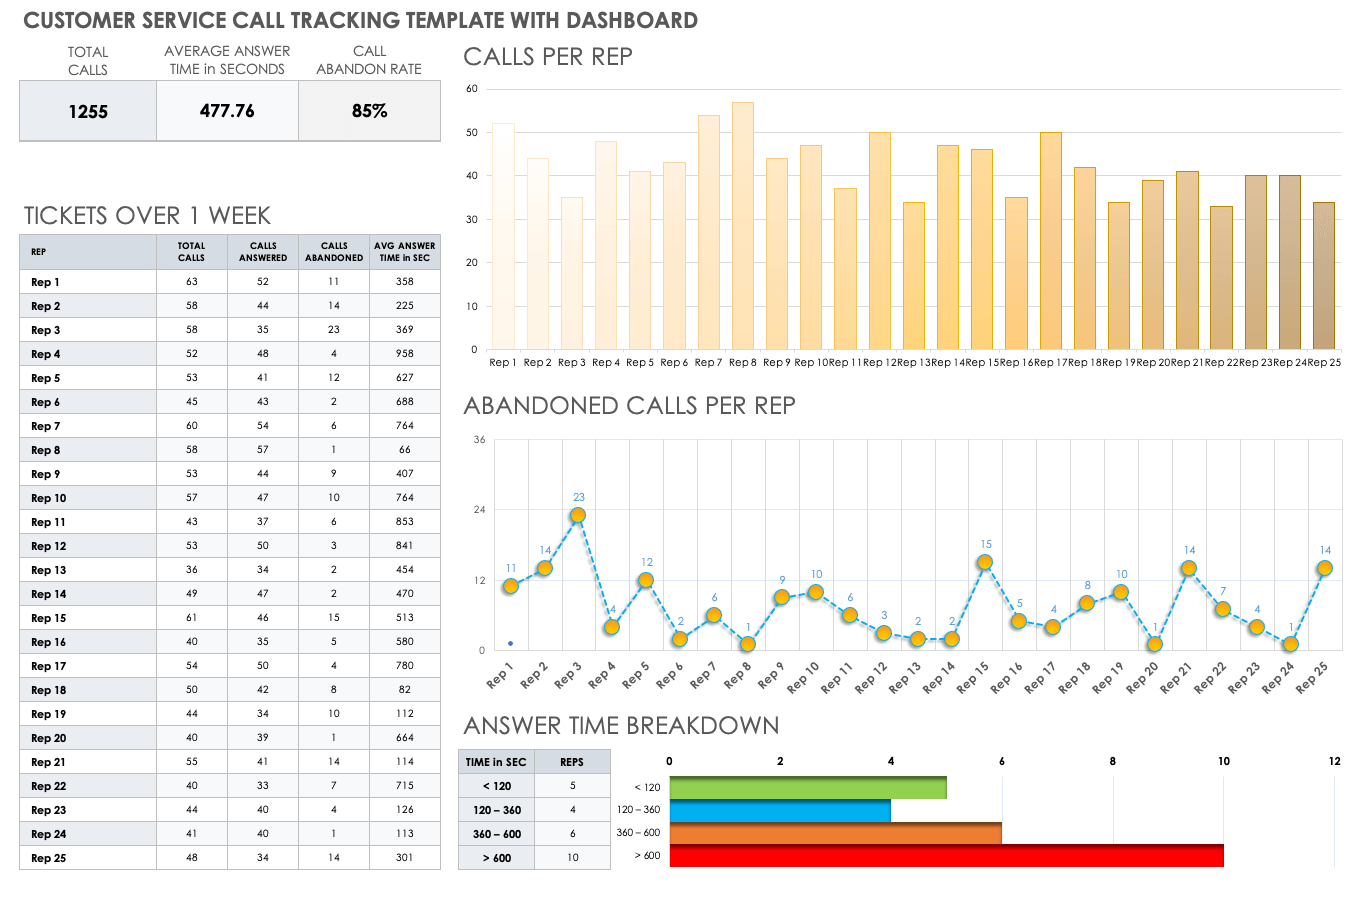 Customer Service Call Tracking Template with Dashboard